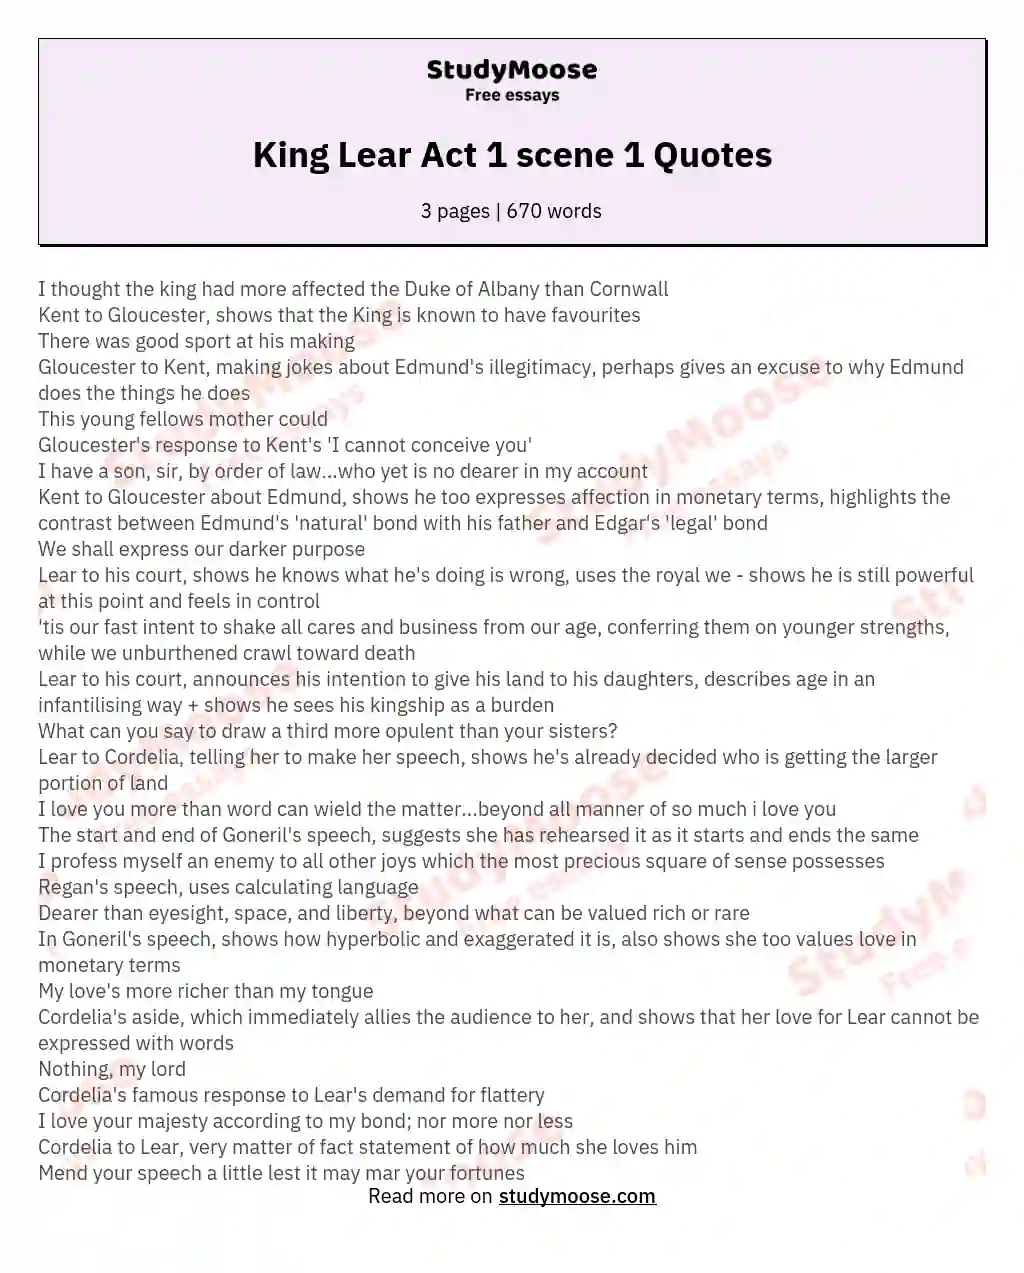 King Lear Act 1 scene 1 Quotes